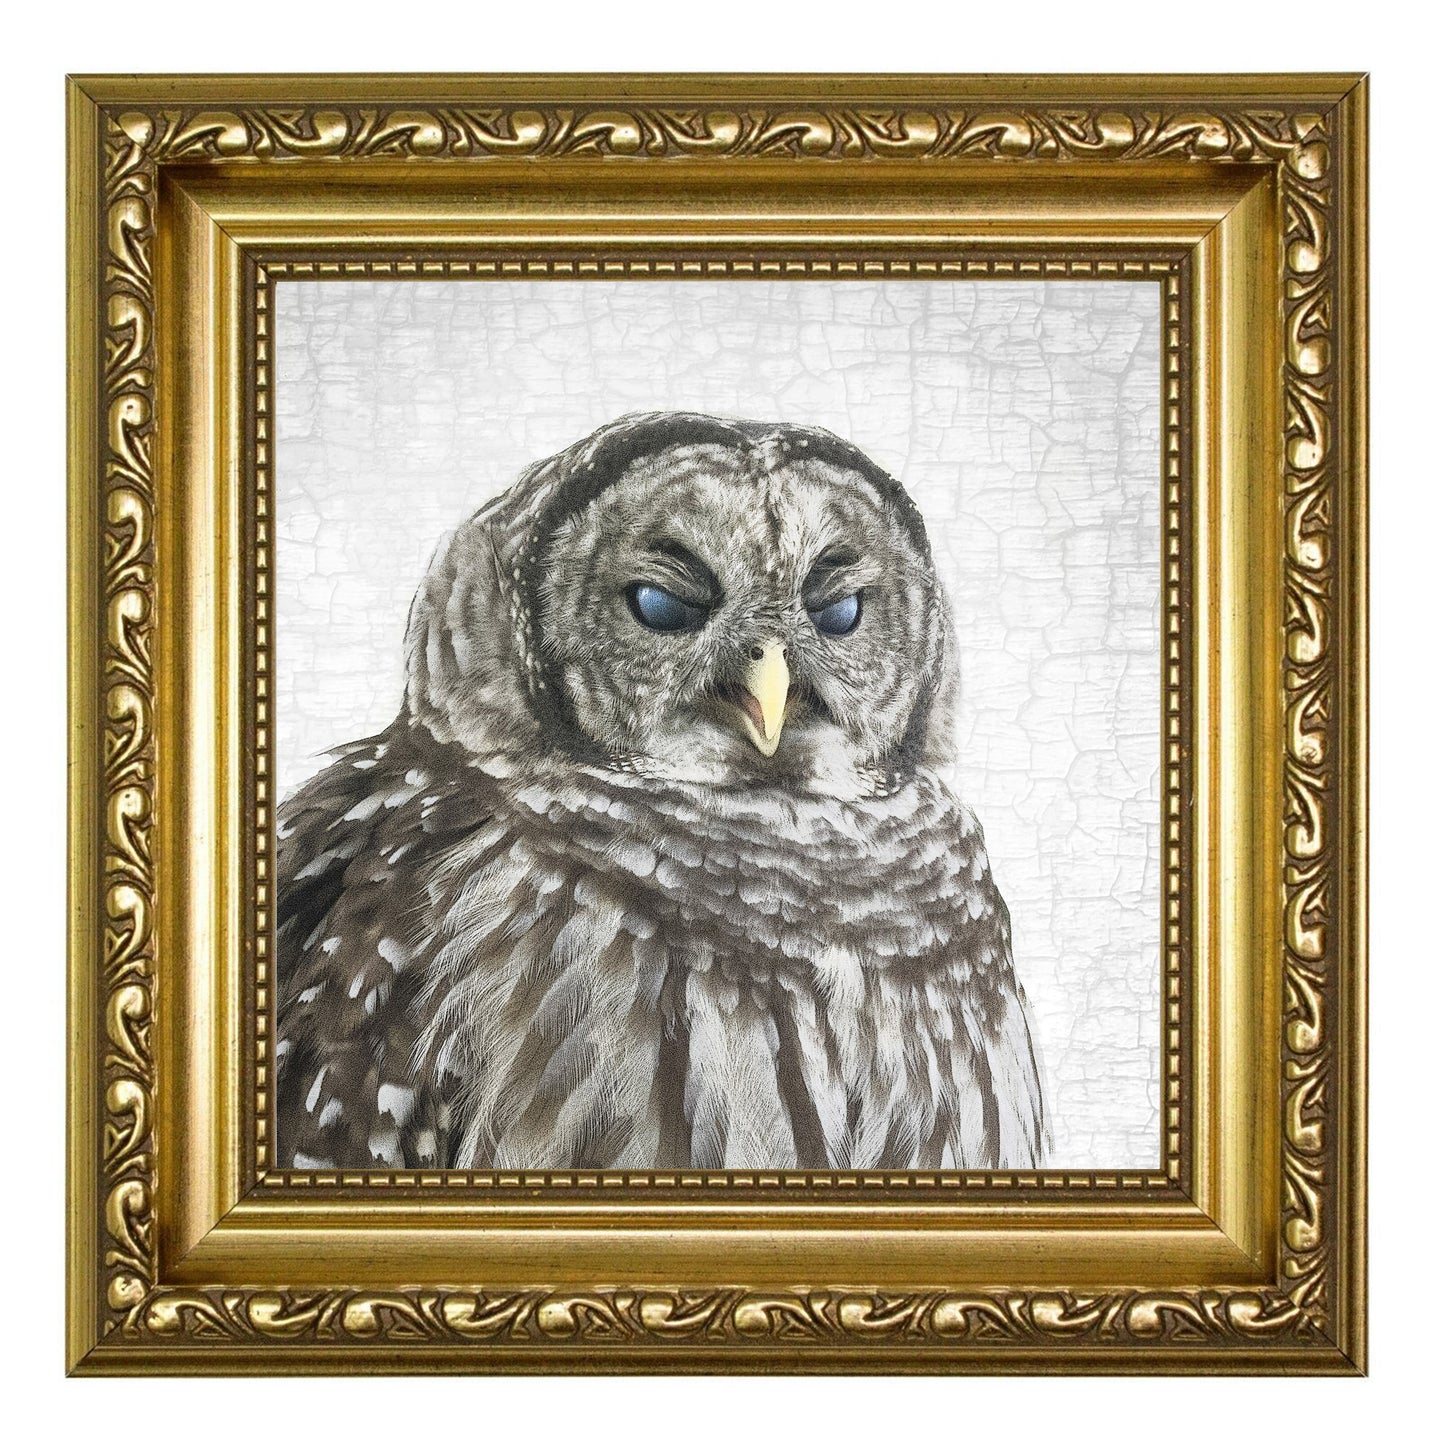 THE BARRED OWL OF JUDGEMENT — Fine Art Print, Judgmental Birds Collection